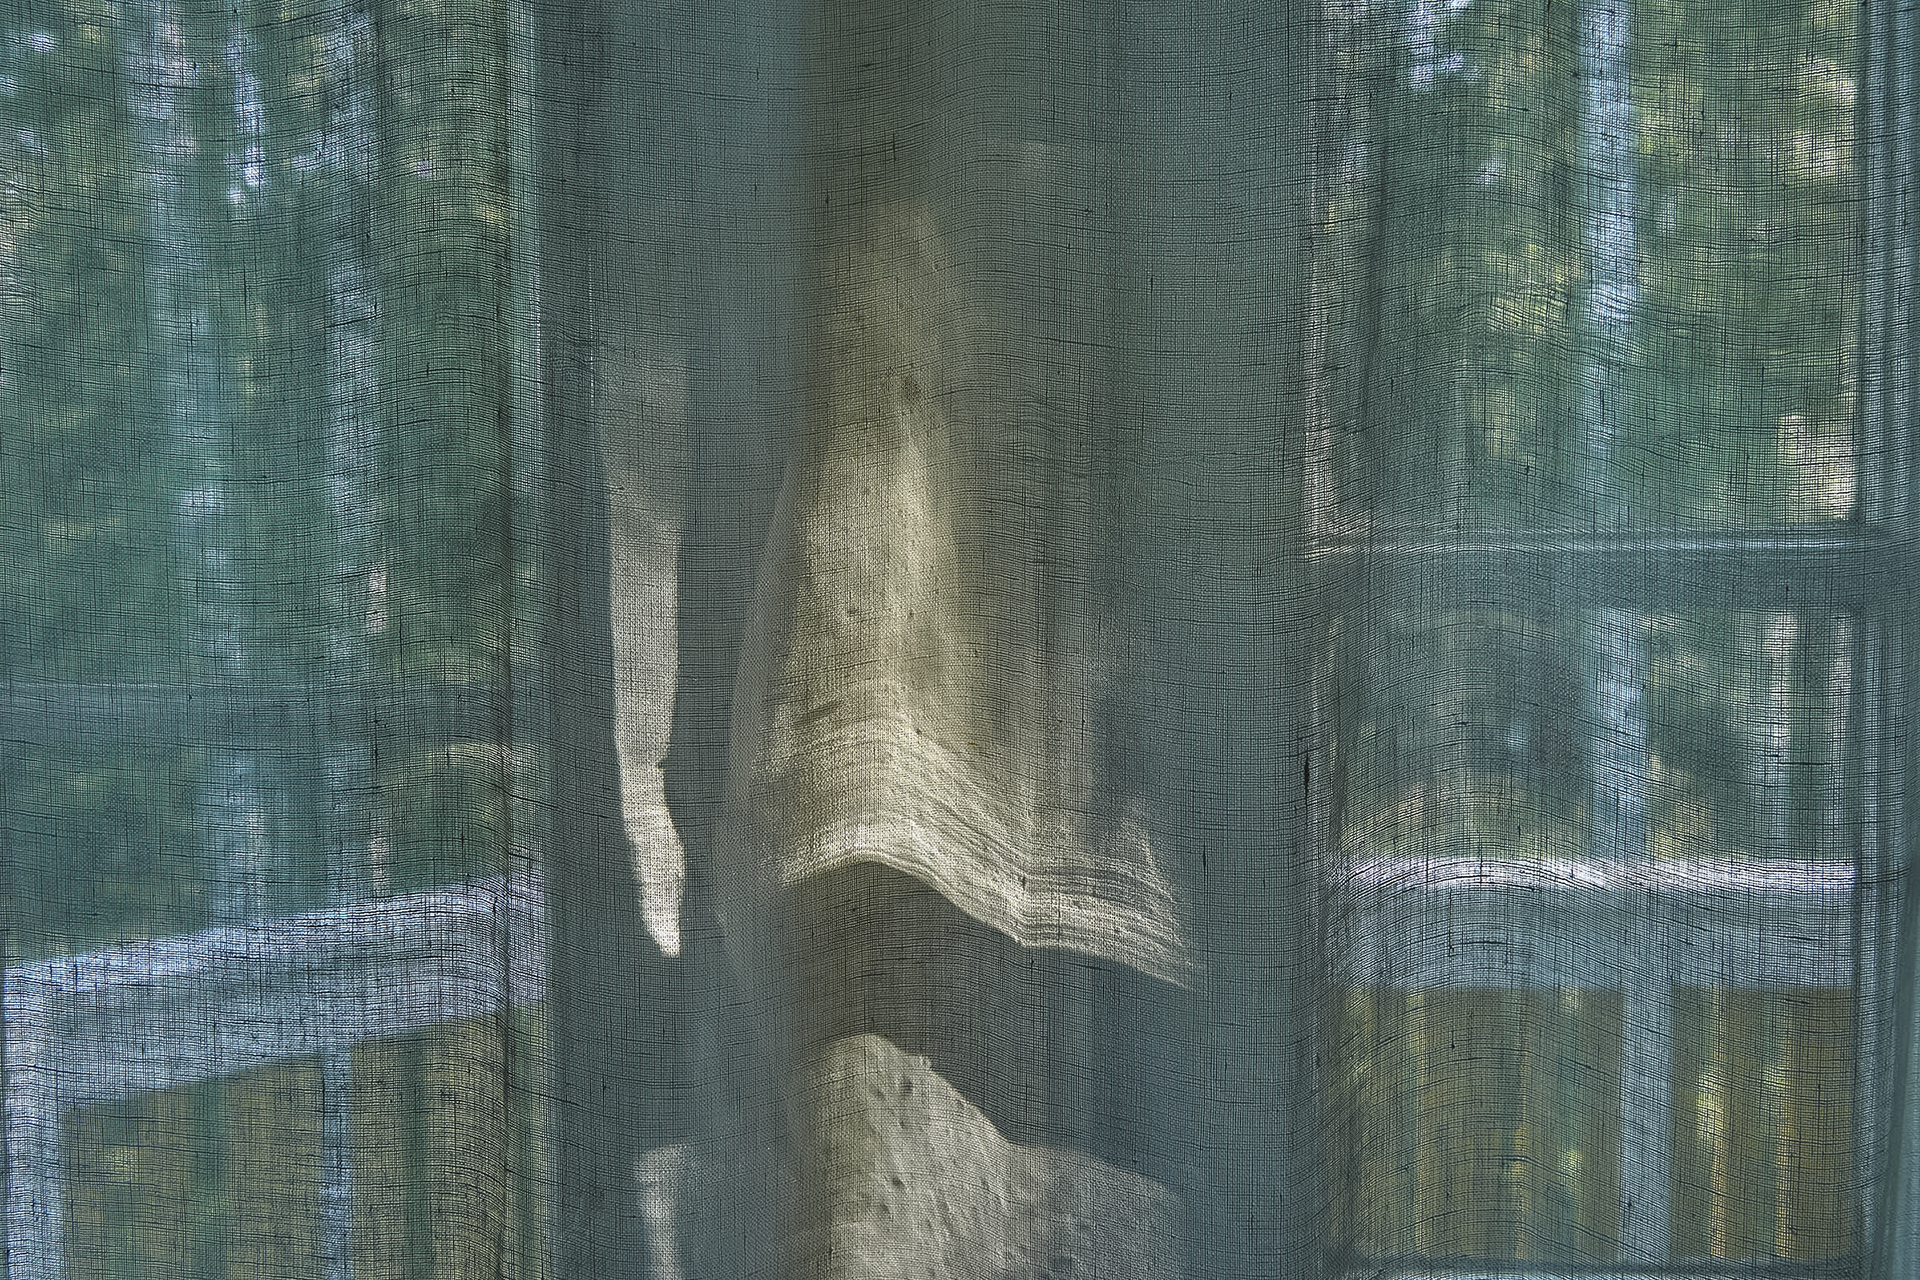 Random objects and places, morning light held in a muslin curtain